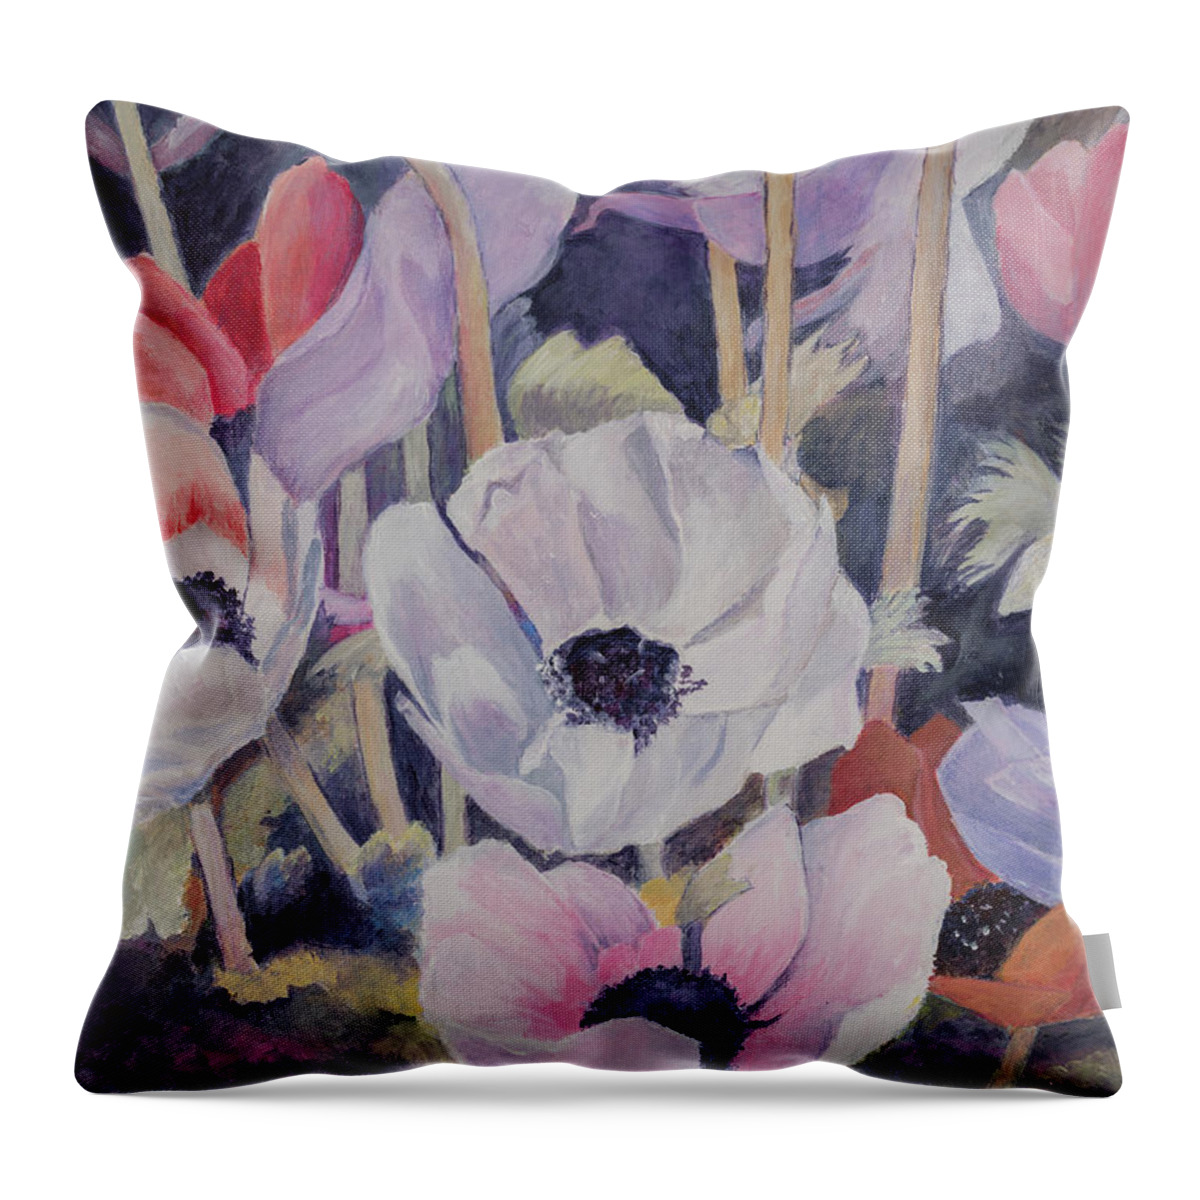 Floralscape Throw Pillow featuring the painting Anemones by Nadine Button